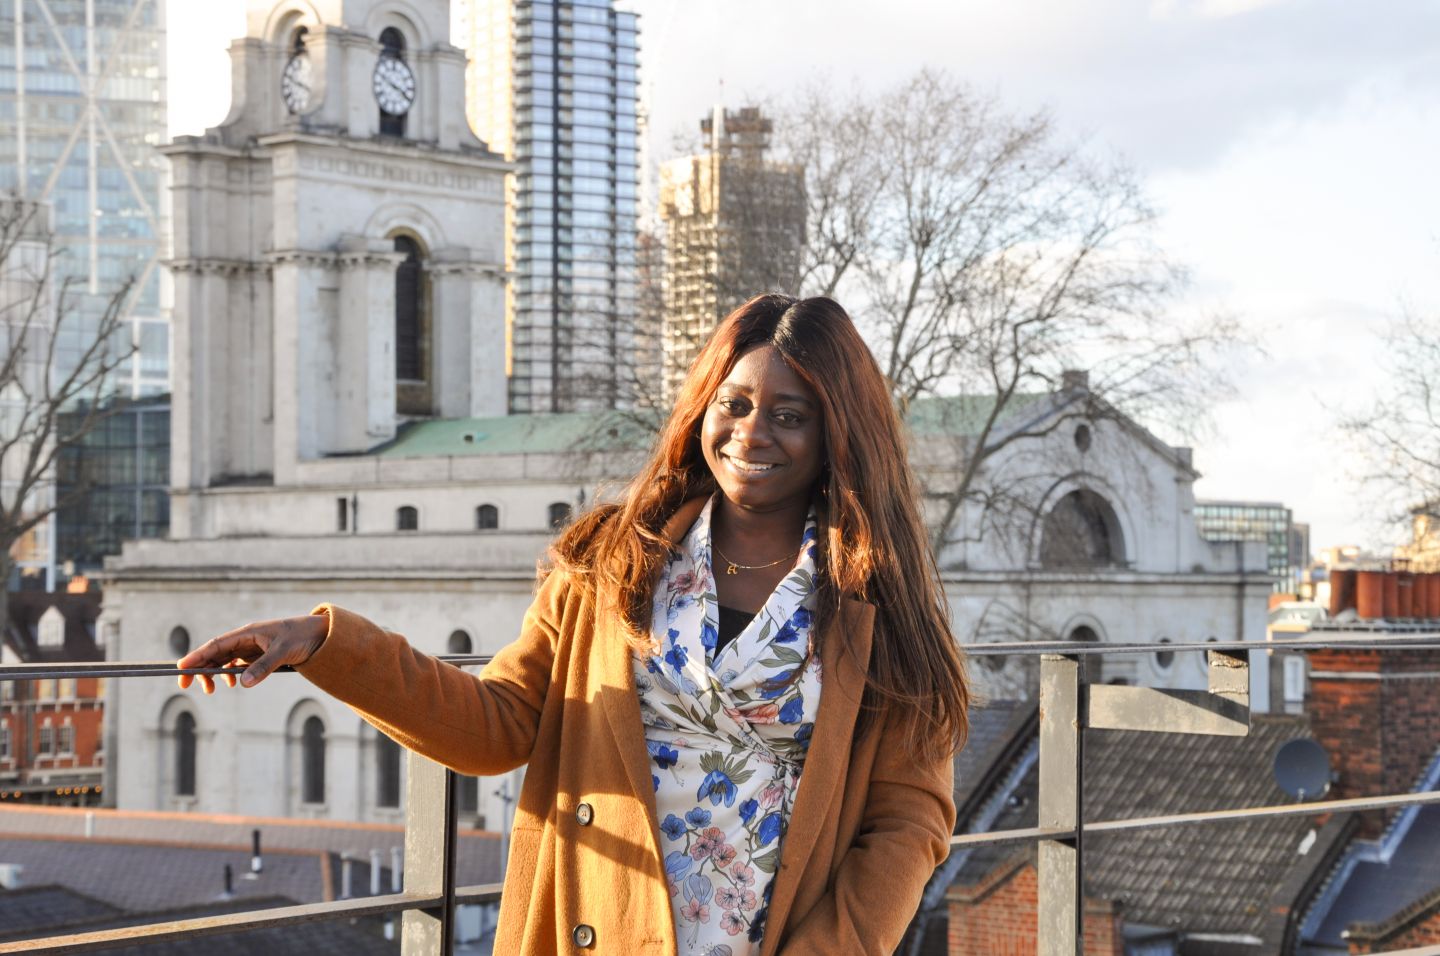 A GCU London student on the rooftop of the London campus, in March 2020